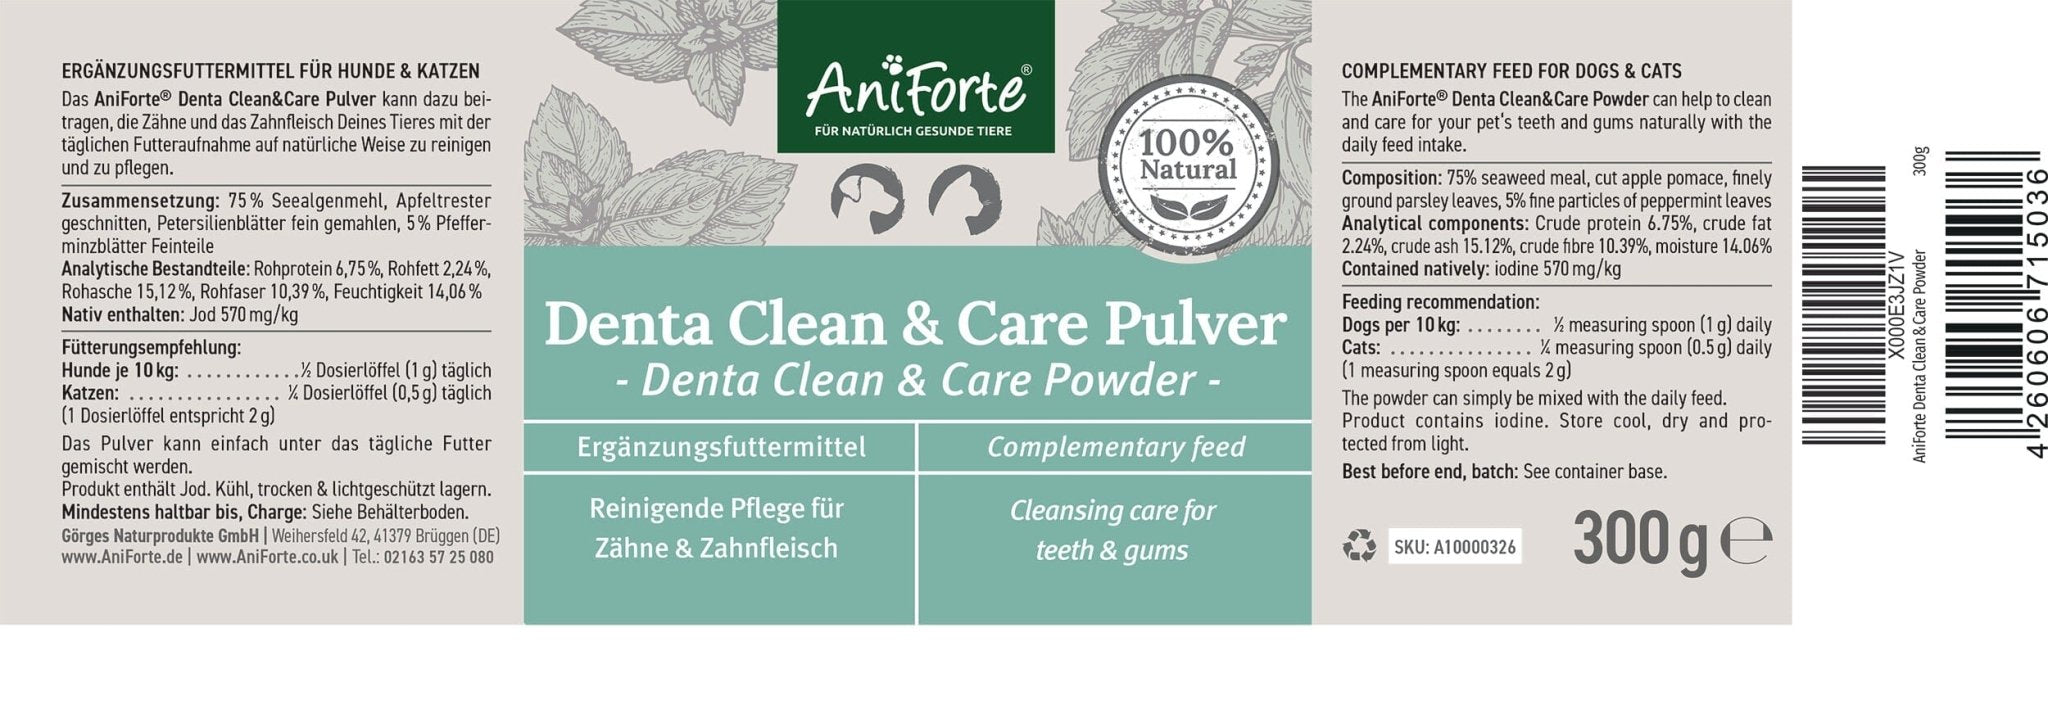 Denta Clean & Care Powder for Dogs and Cats - Cleans Teeth and Gums Naturally - AniForte UK